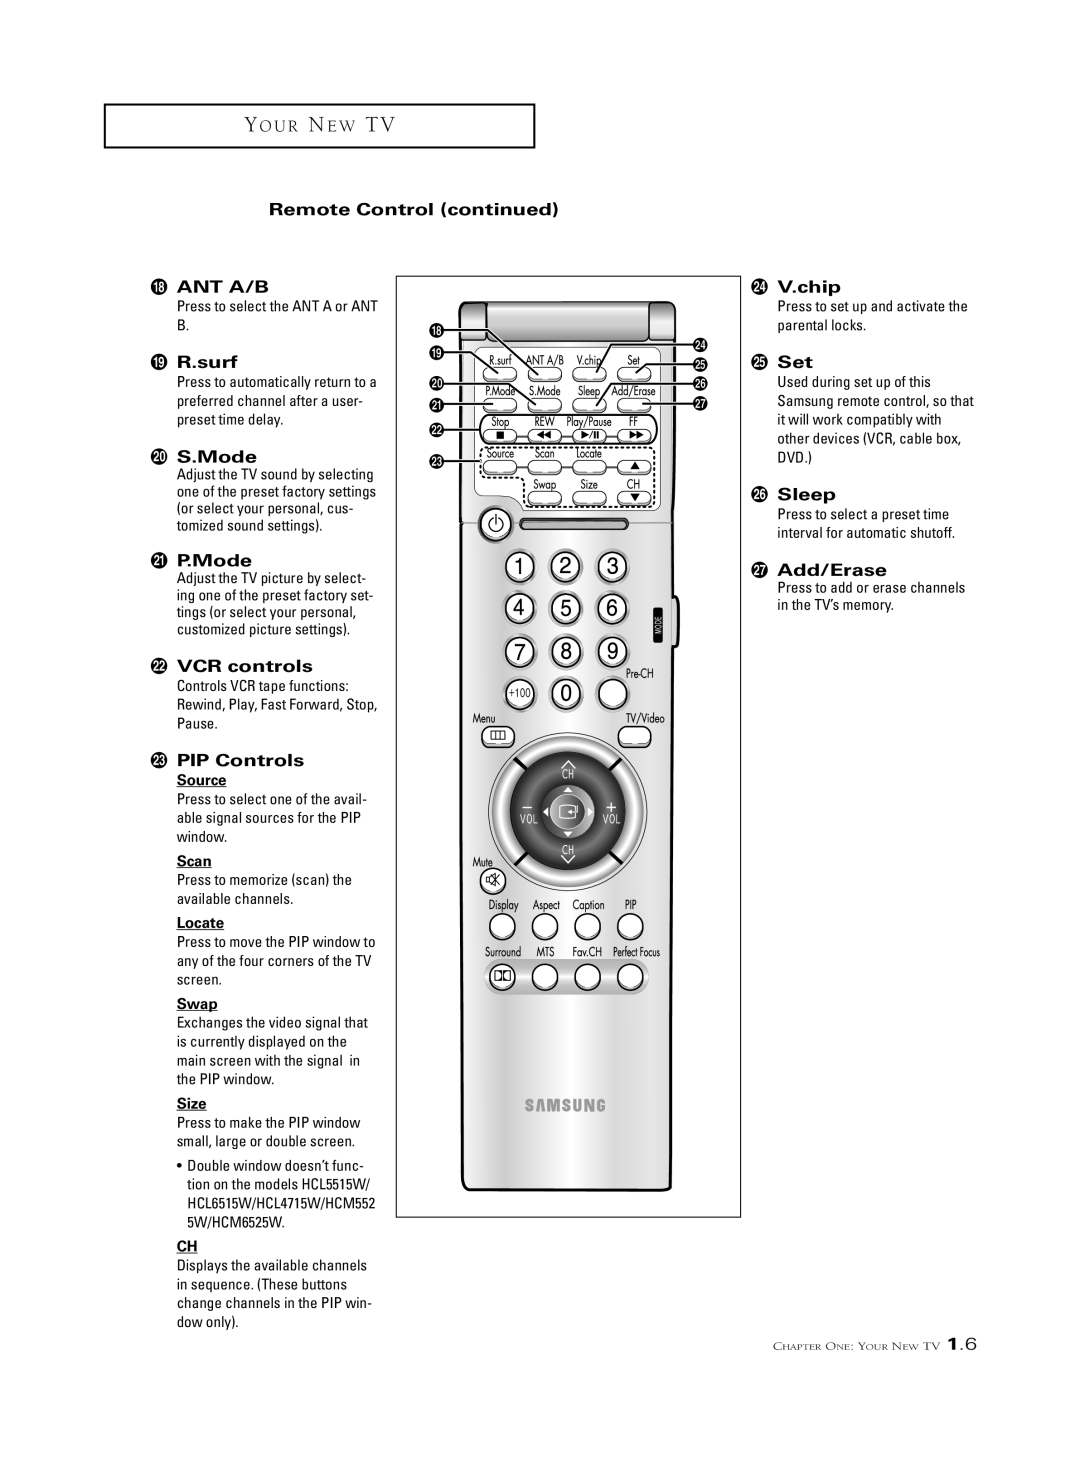 Samsung HCL 552W, HCM6525W, HCL 652W, HCL 473W, HCL 6515W, HCM653W, HCM 553W, HCL5515W manual Remote Control continued ¯ ANT A/B 